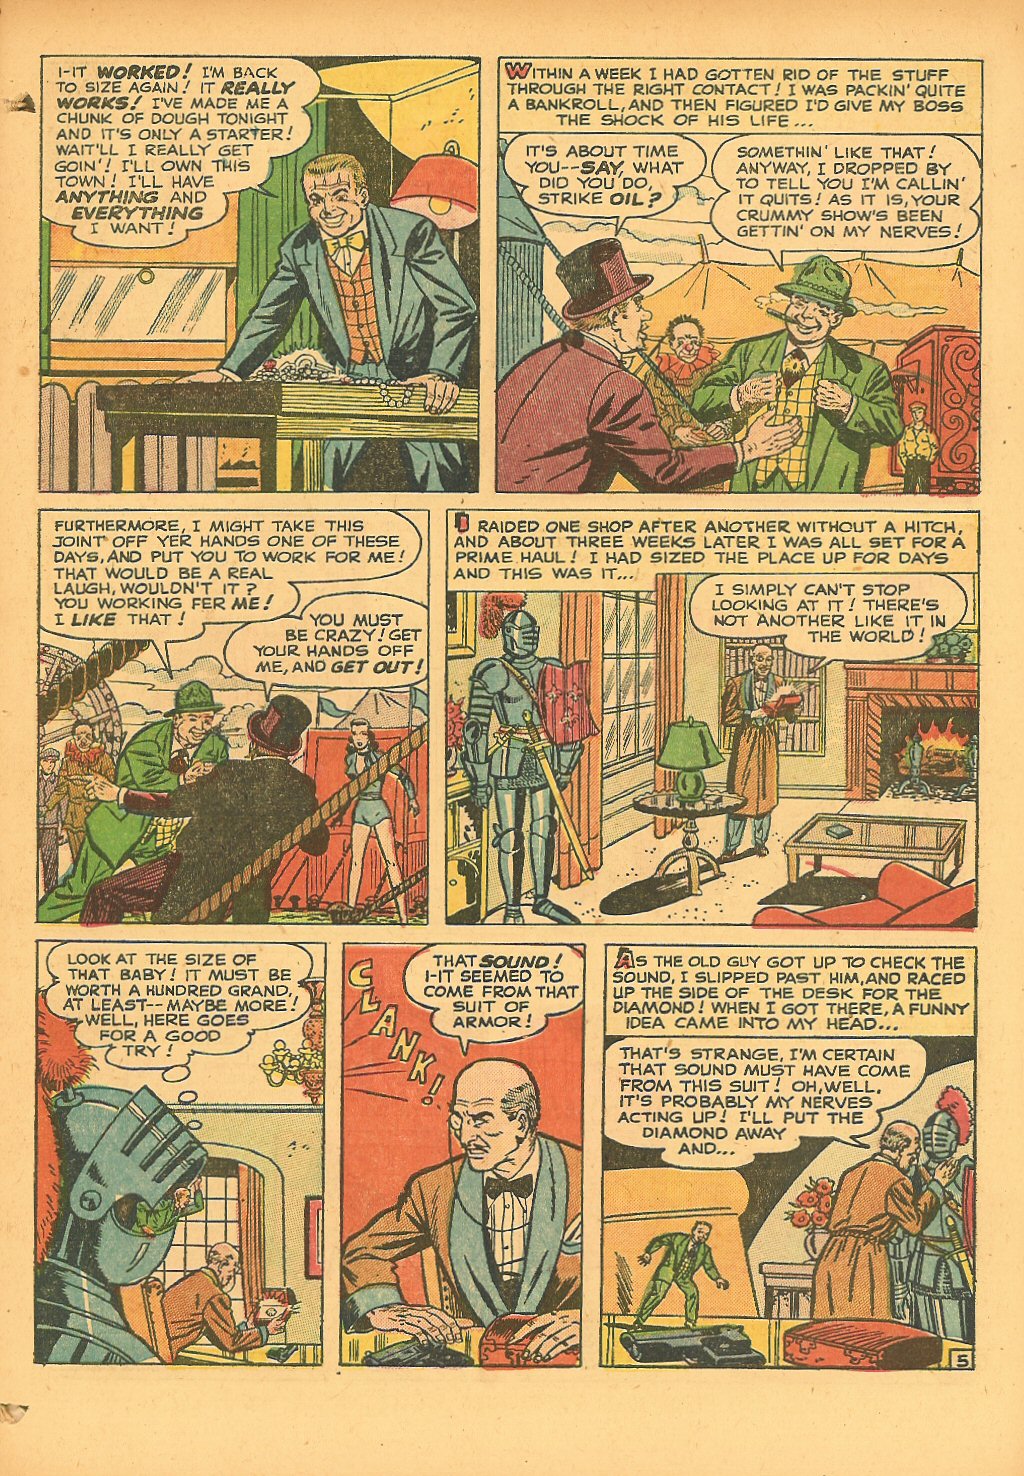 Marvel Tales (1949) 100 Page 5